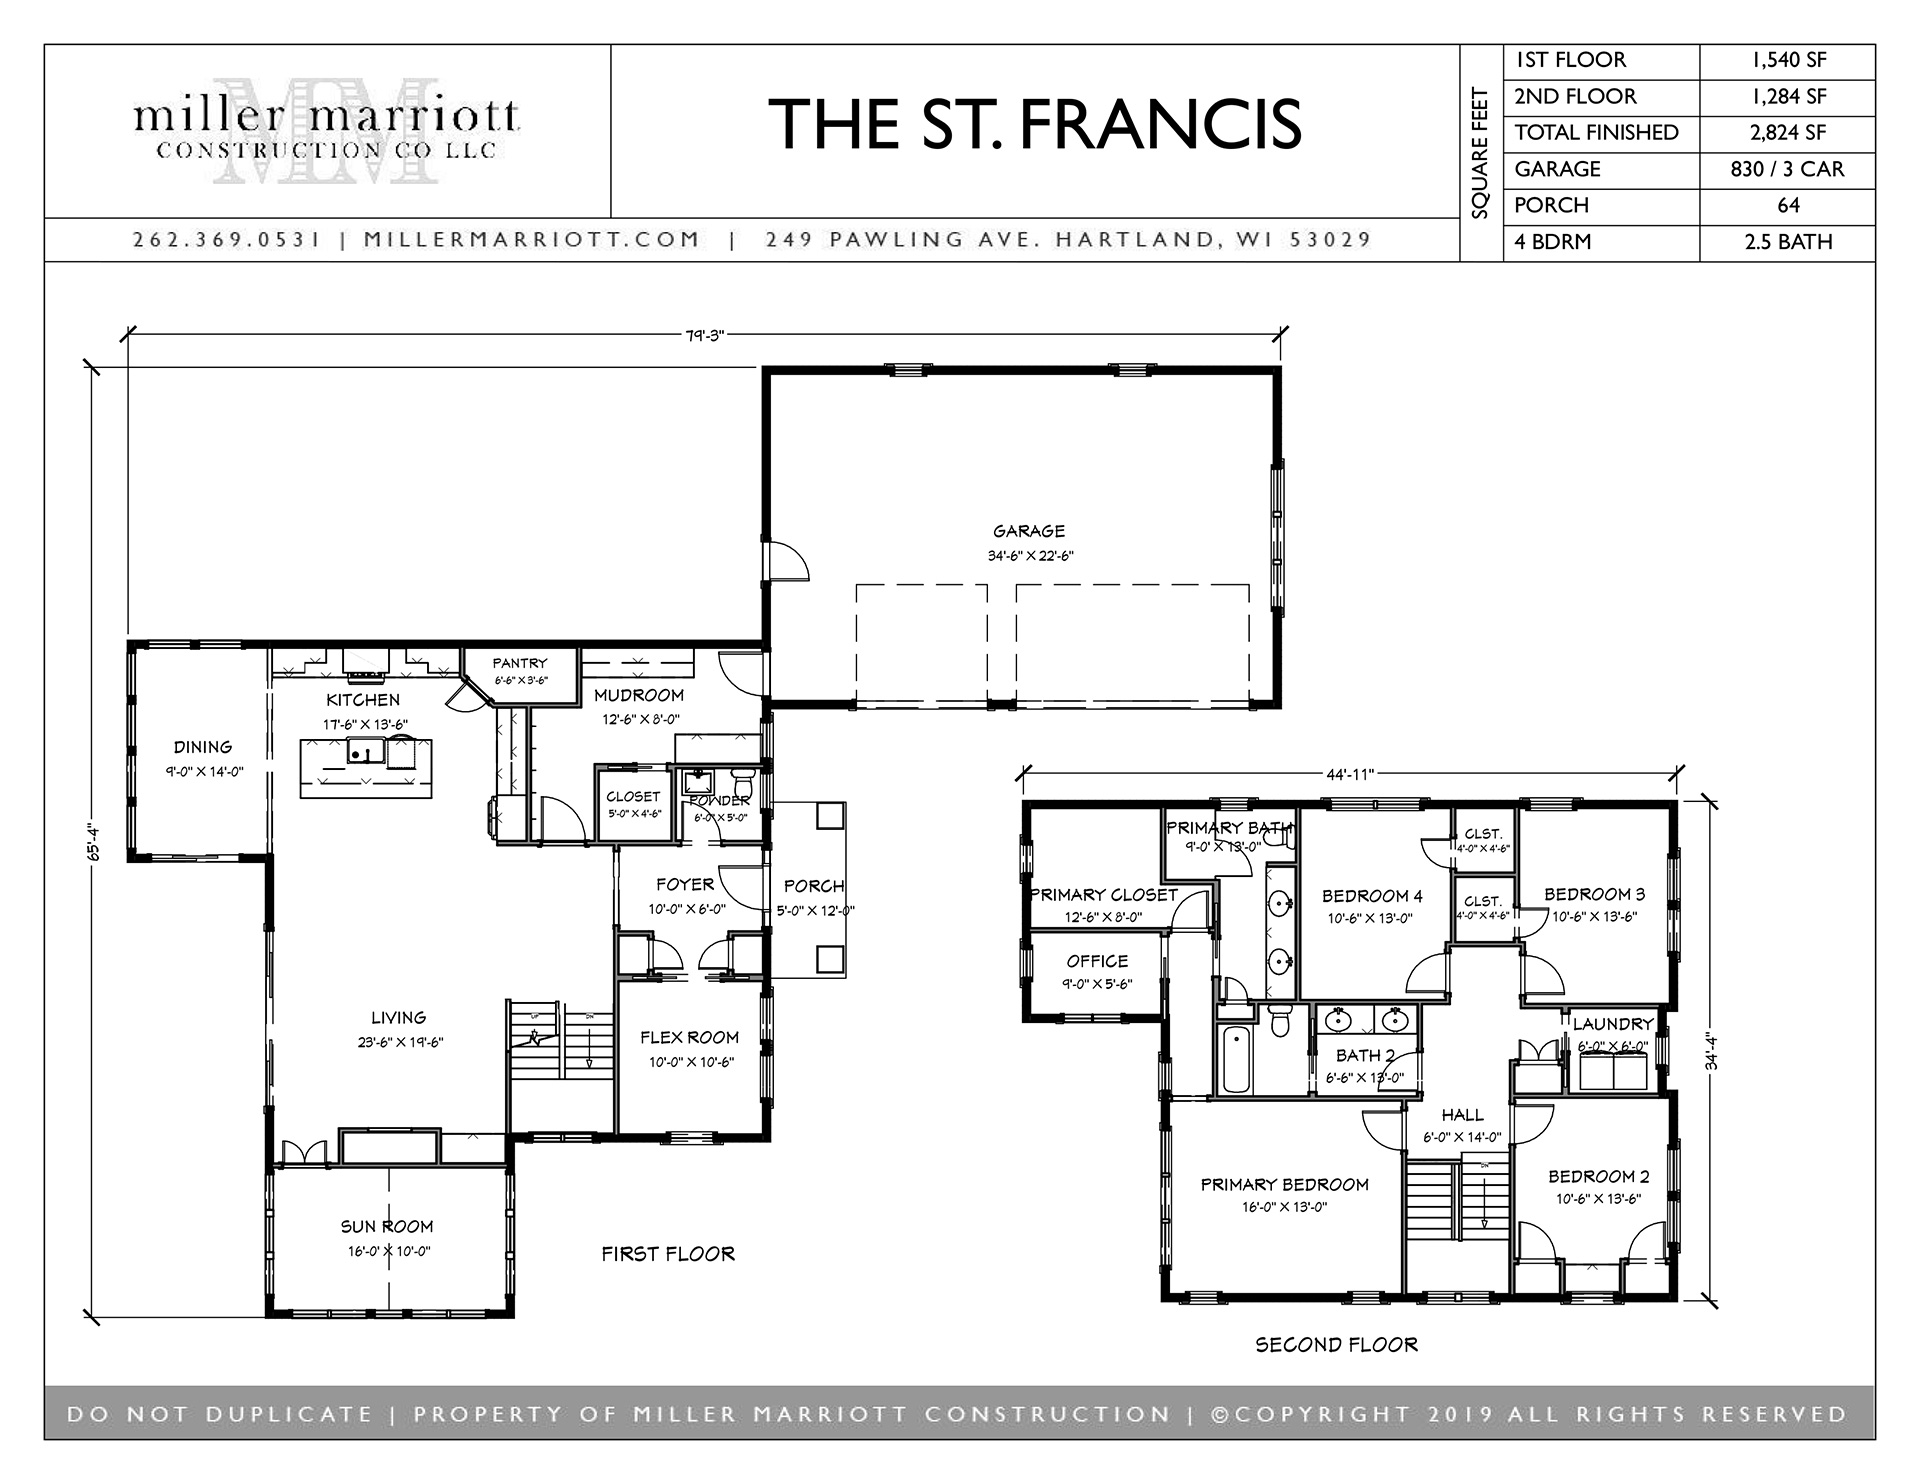 The St. Francis first and second floor plan